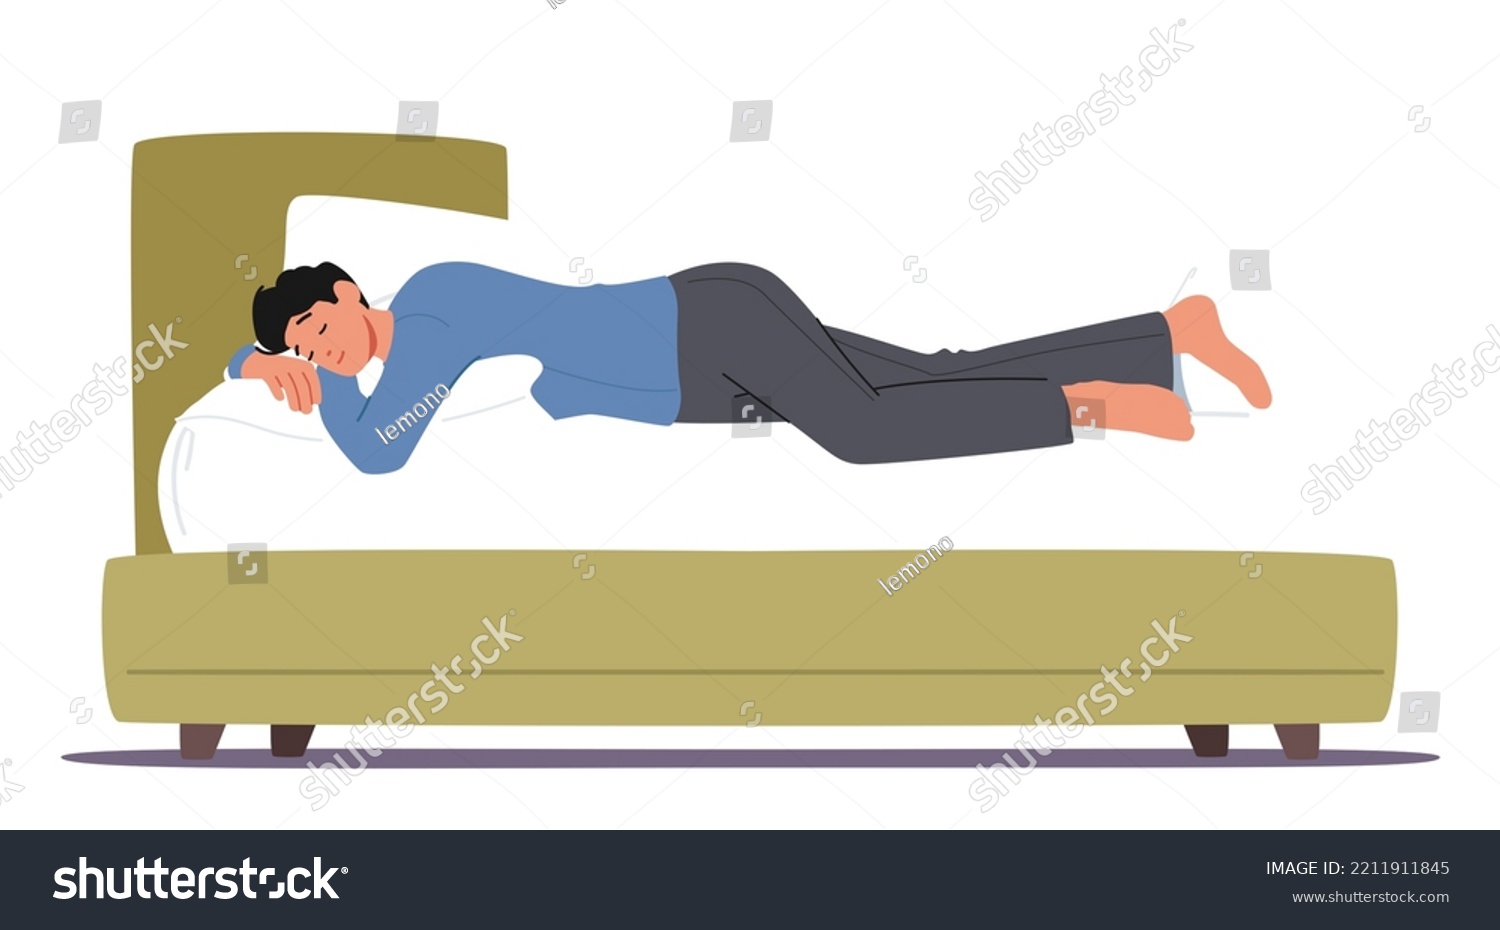 SVG of Dreamy Male Character Sleeping in Relaxed Pose Lying on Bed and Hugging Pillow Side View. Bedding Time, Sleep or Nap Isolated on White Background. Cartoon People Vector Illustration svg